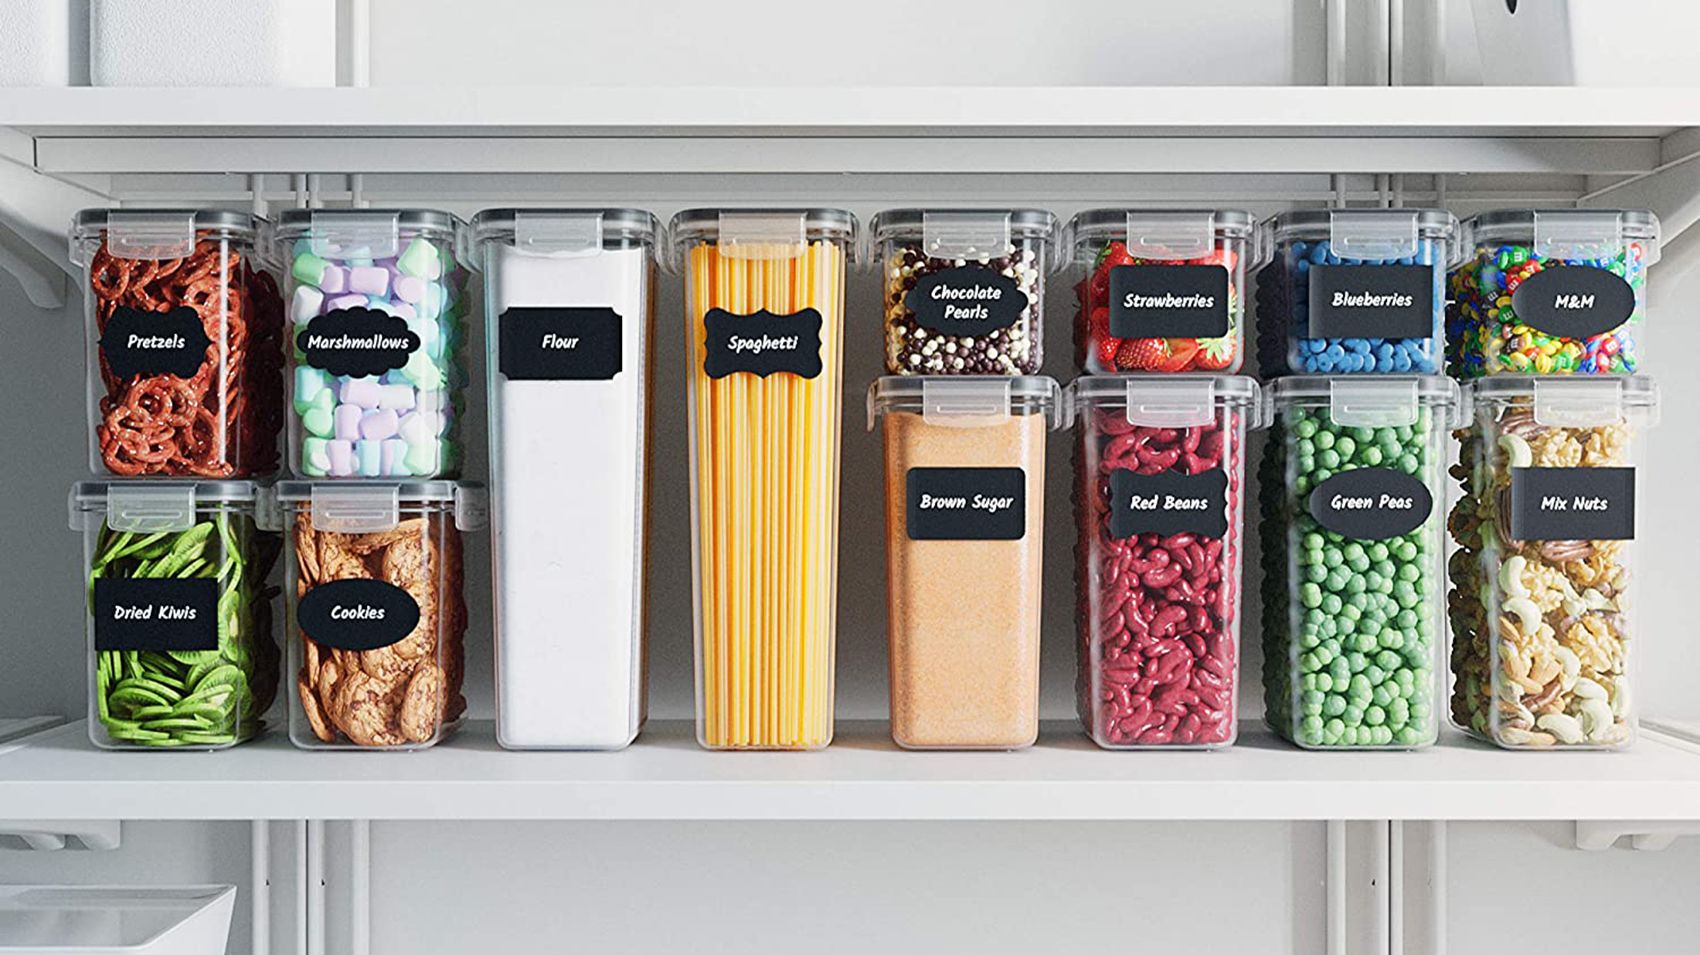 Containers & Organization Reviews: The Best Kitchen Organization Tools